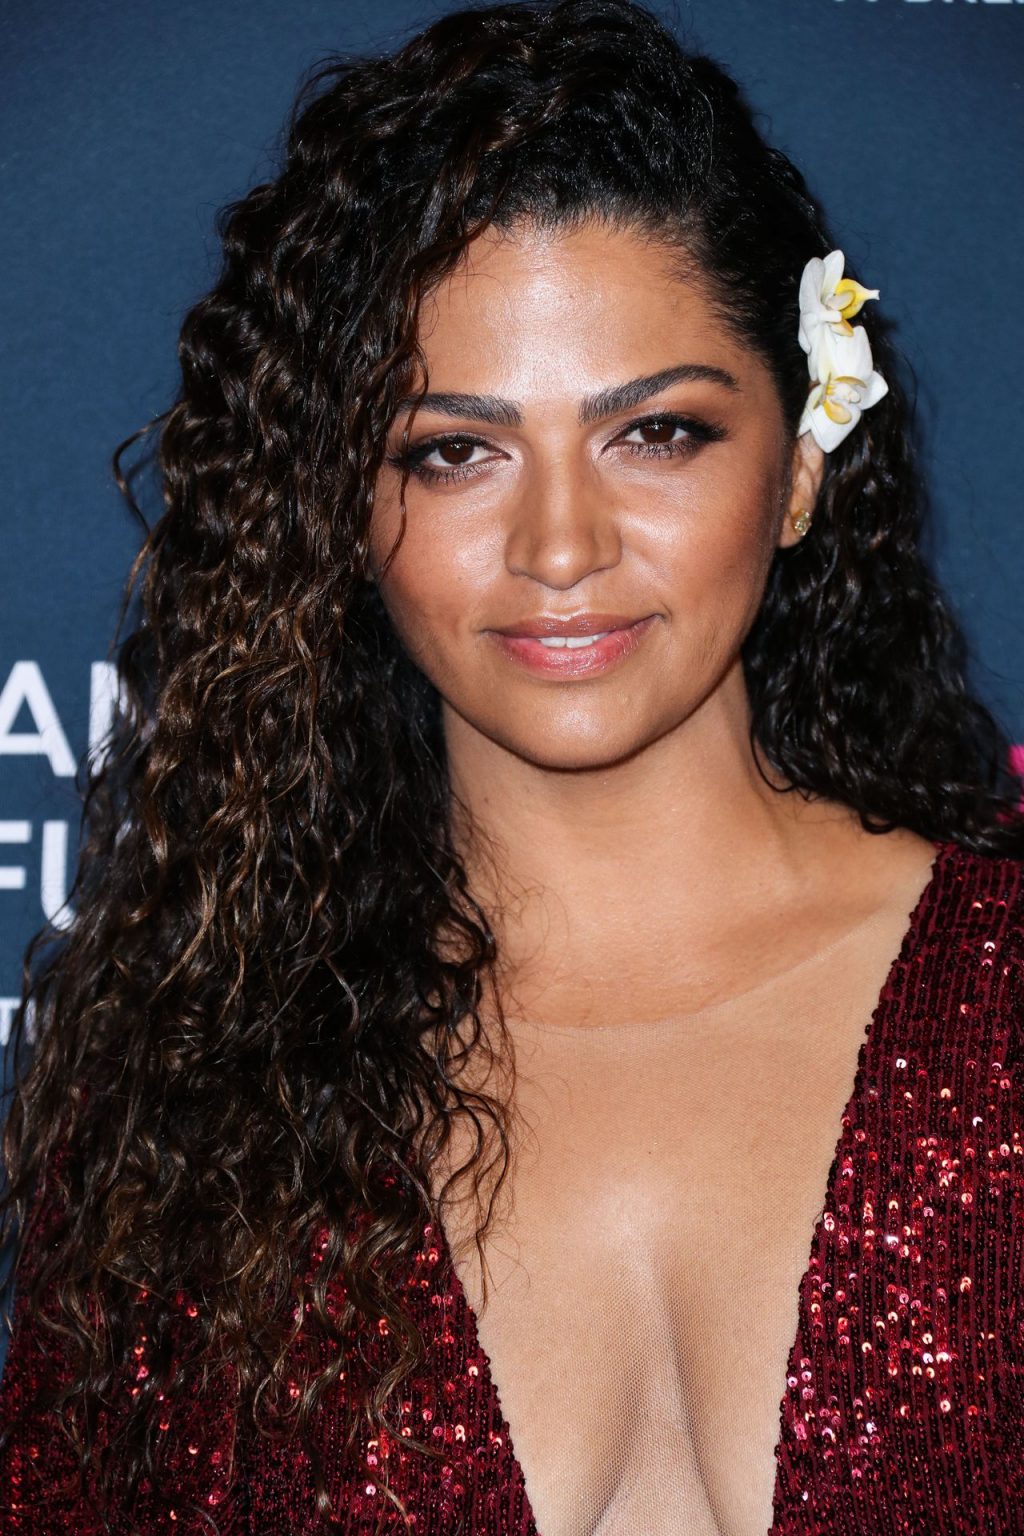 Camila Alves McConaughey Shows Off Her Cleavage at The Event in Beverly Hills (39 Photos)